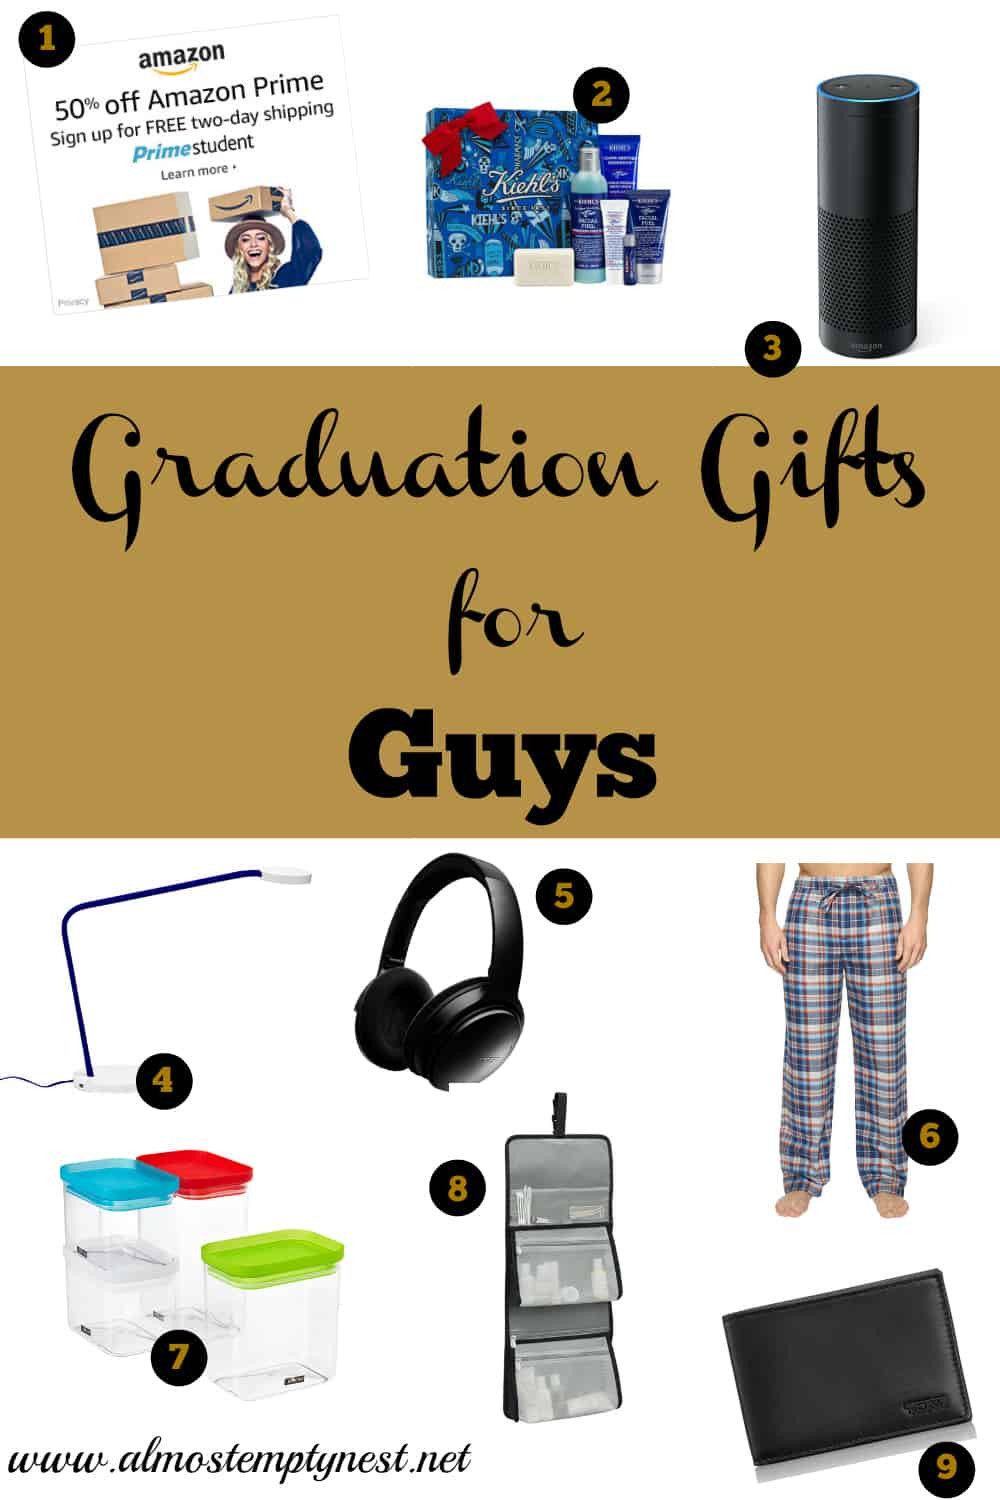 Graduation Gift Ideas For Guys
 Graduation Gifts for Guys Almost Empty Nest